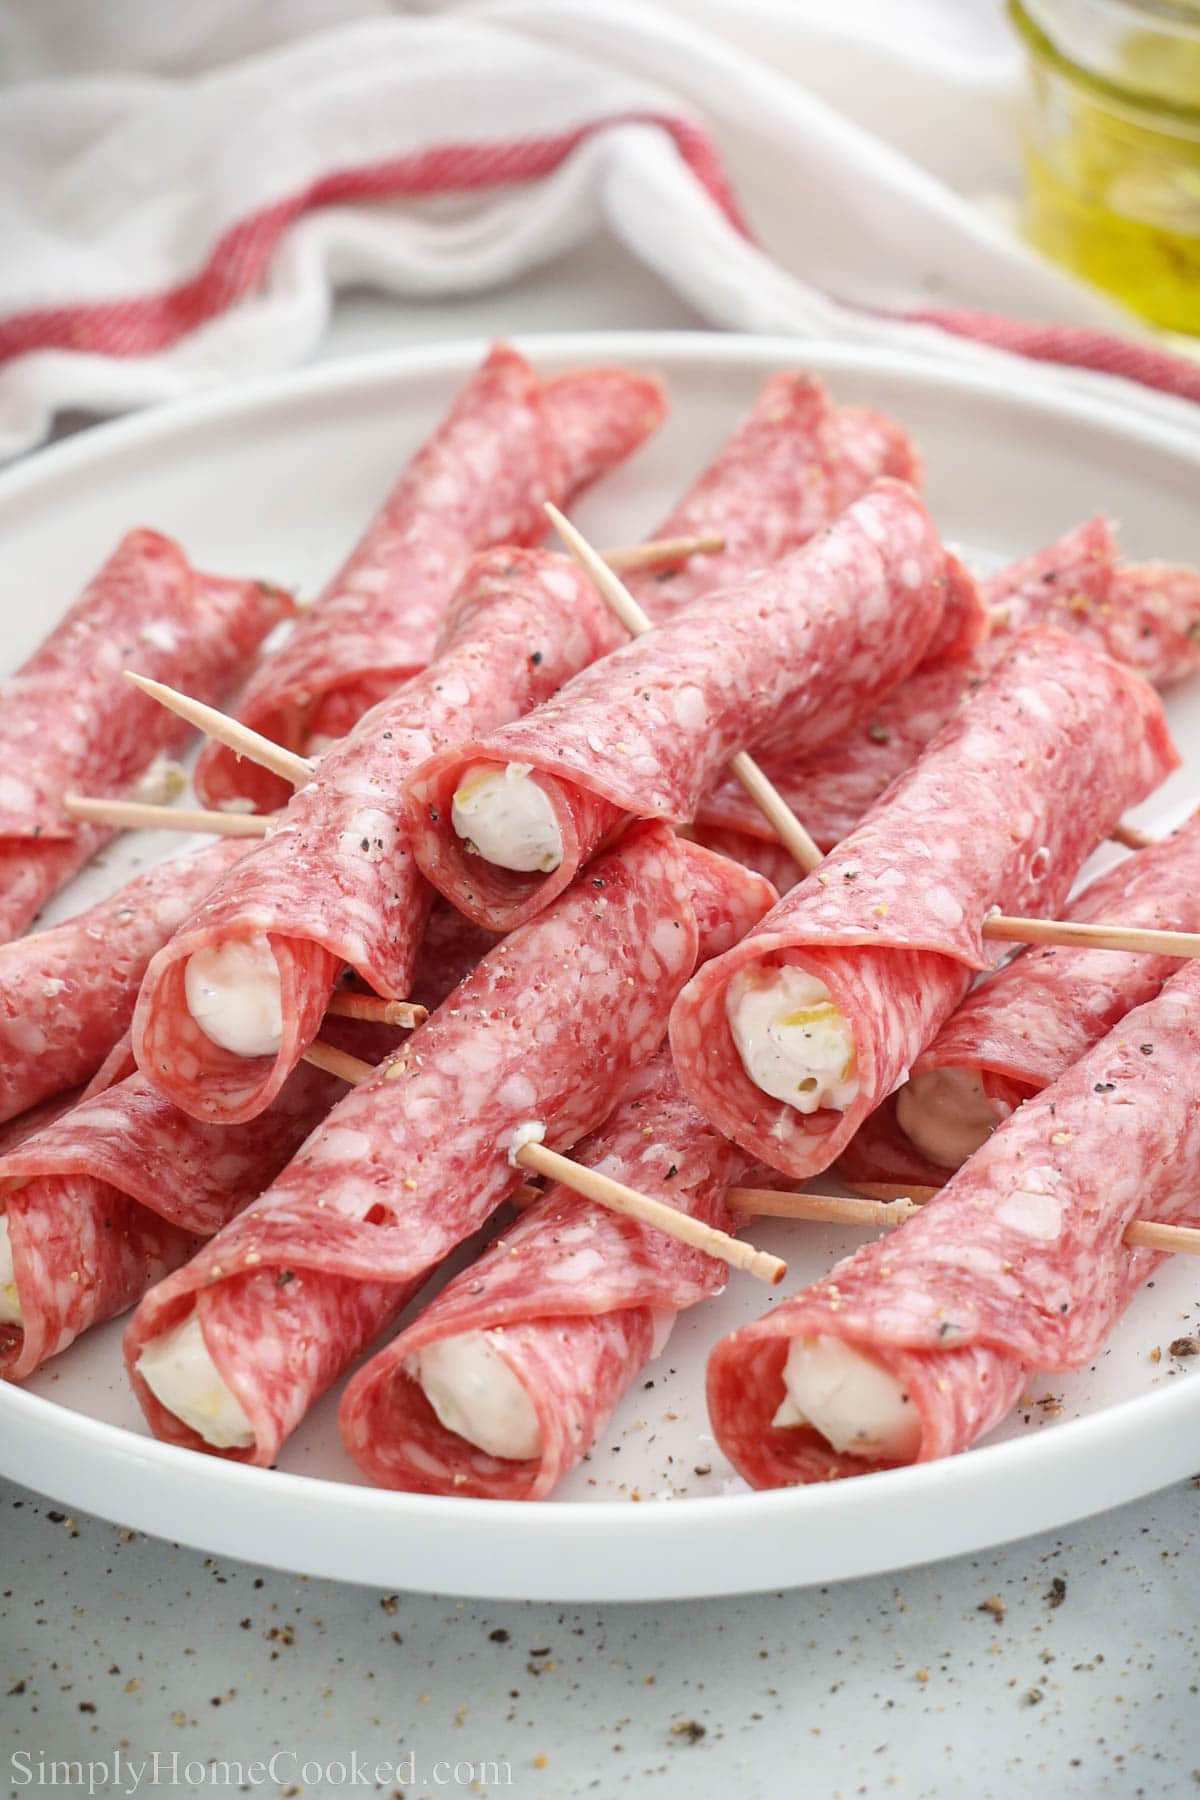 Plate of Salami Roll-Ups.